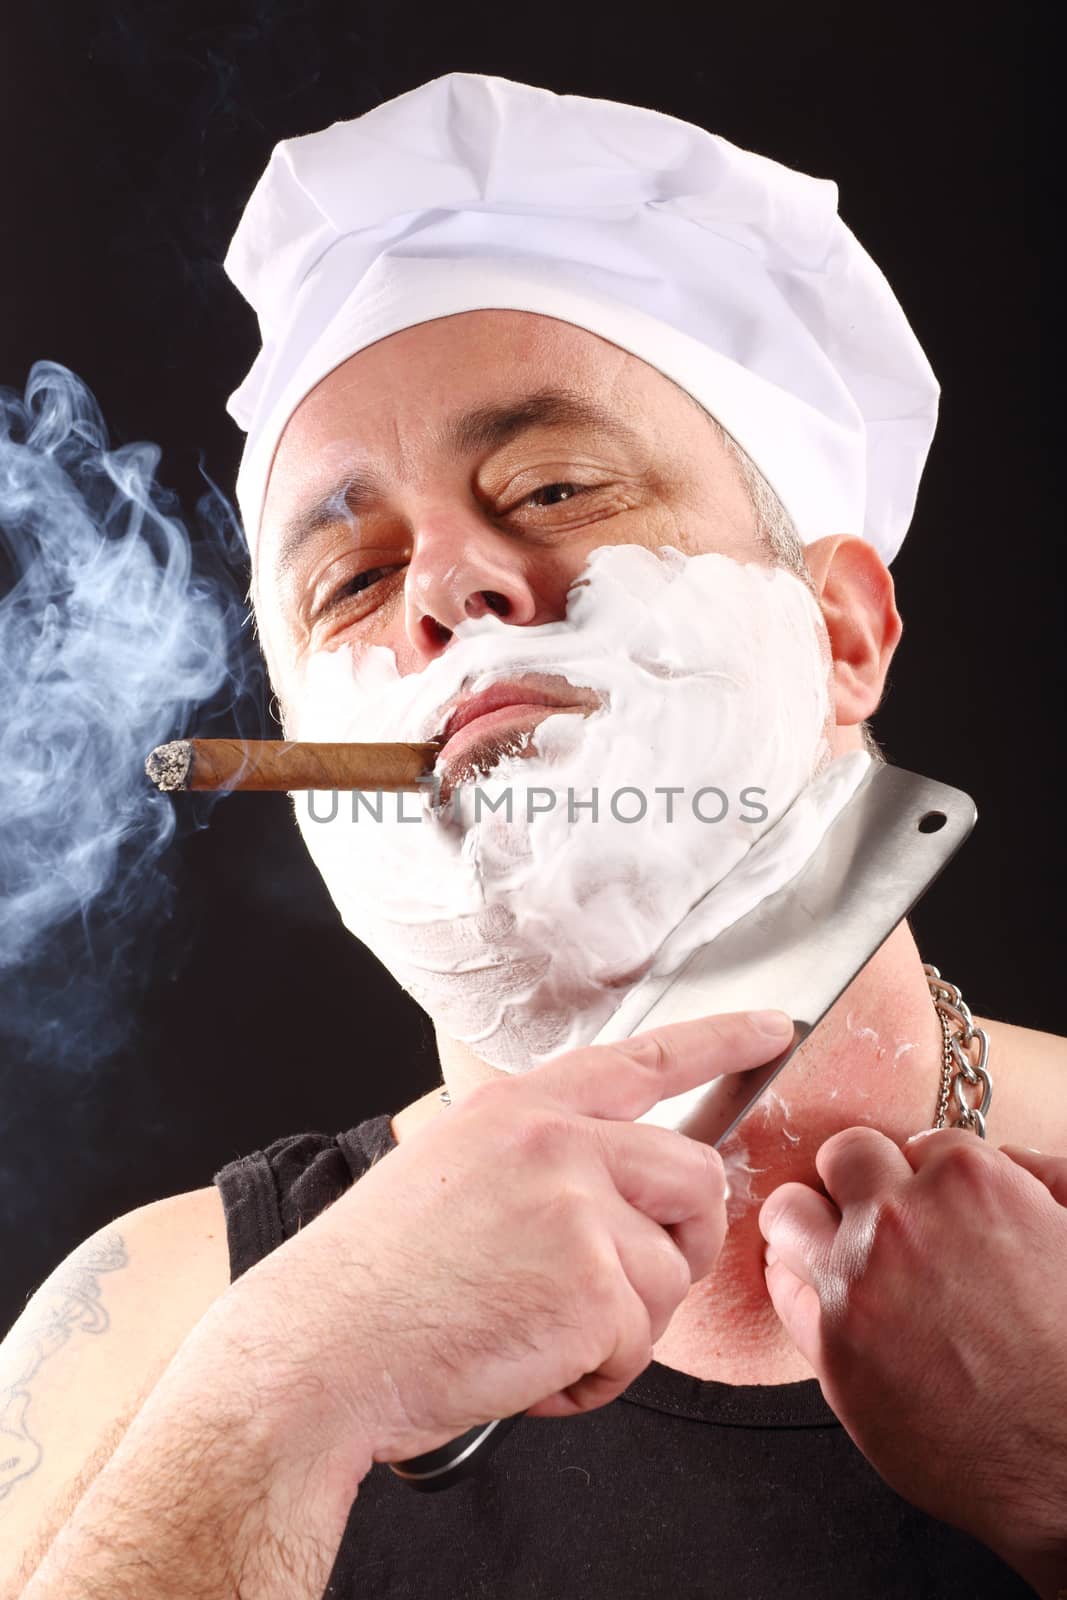 chef shaves with chopper by alexkosev